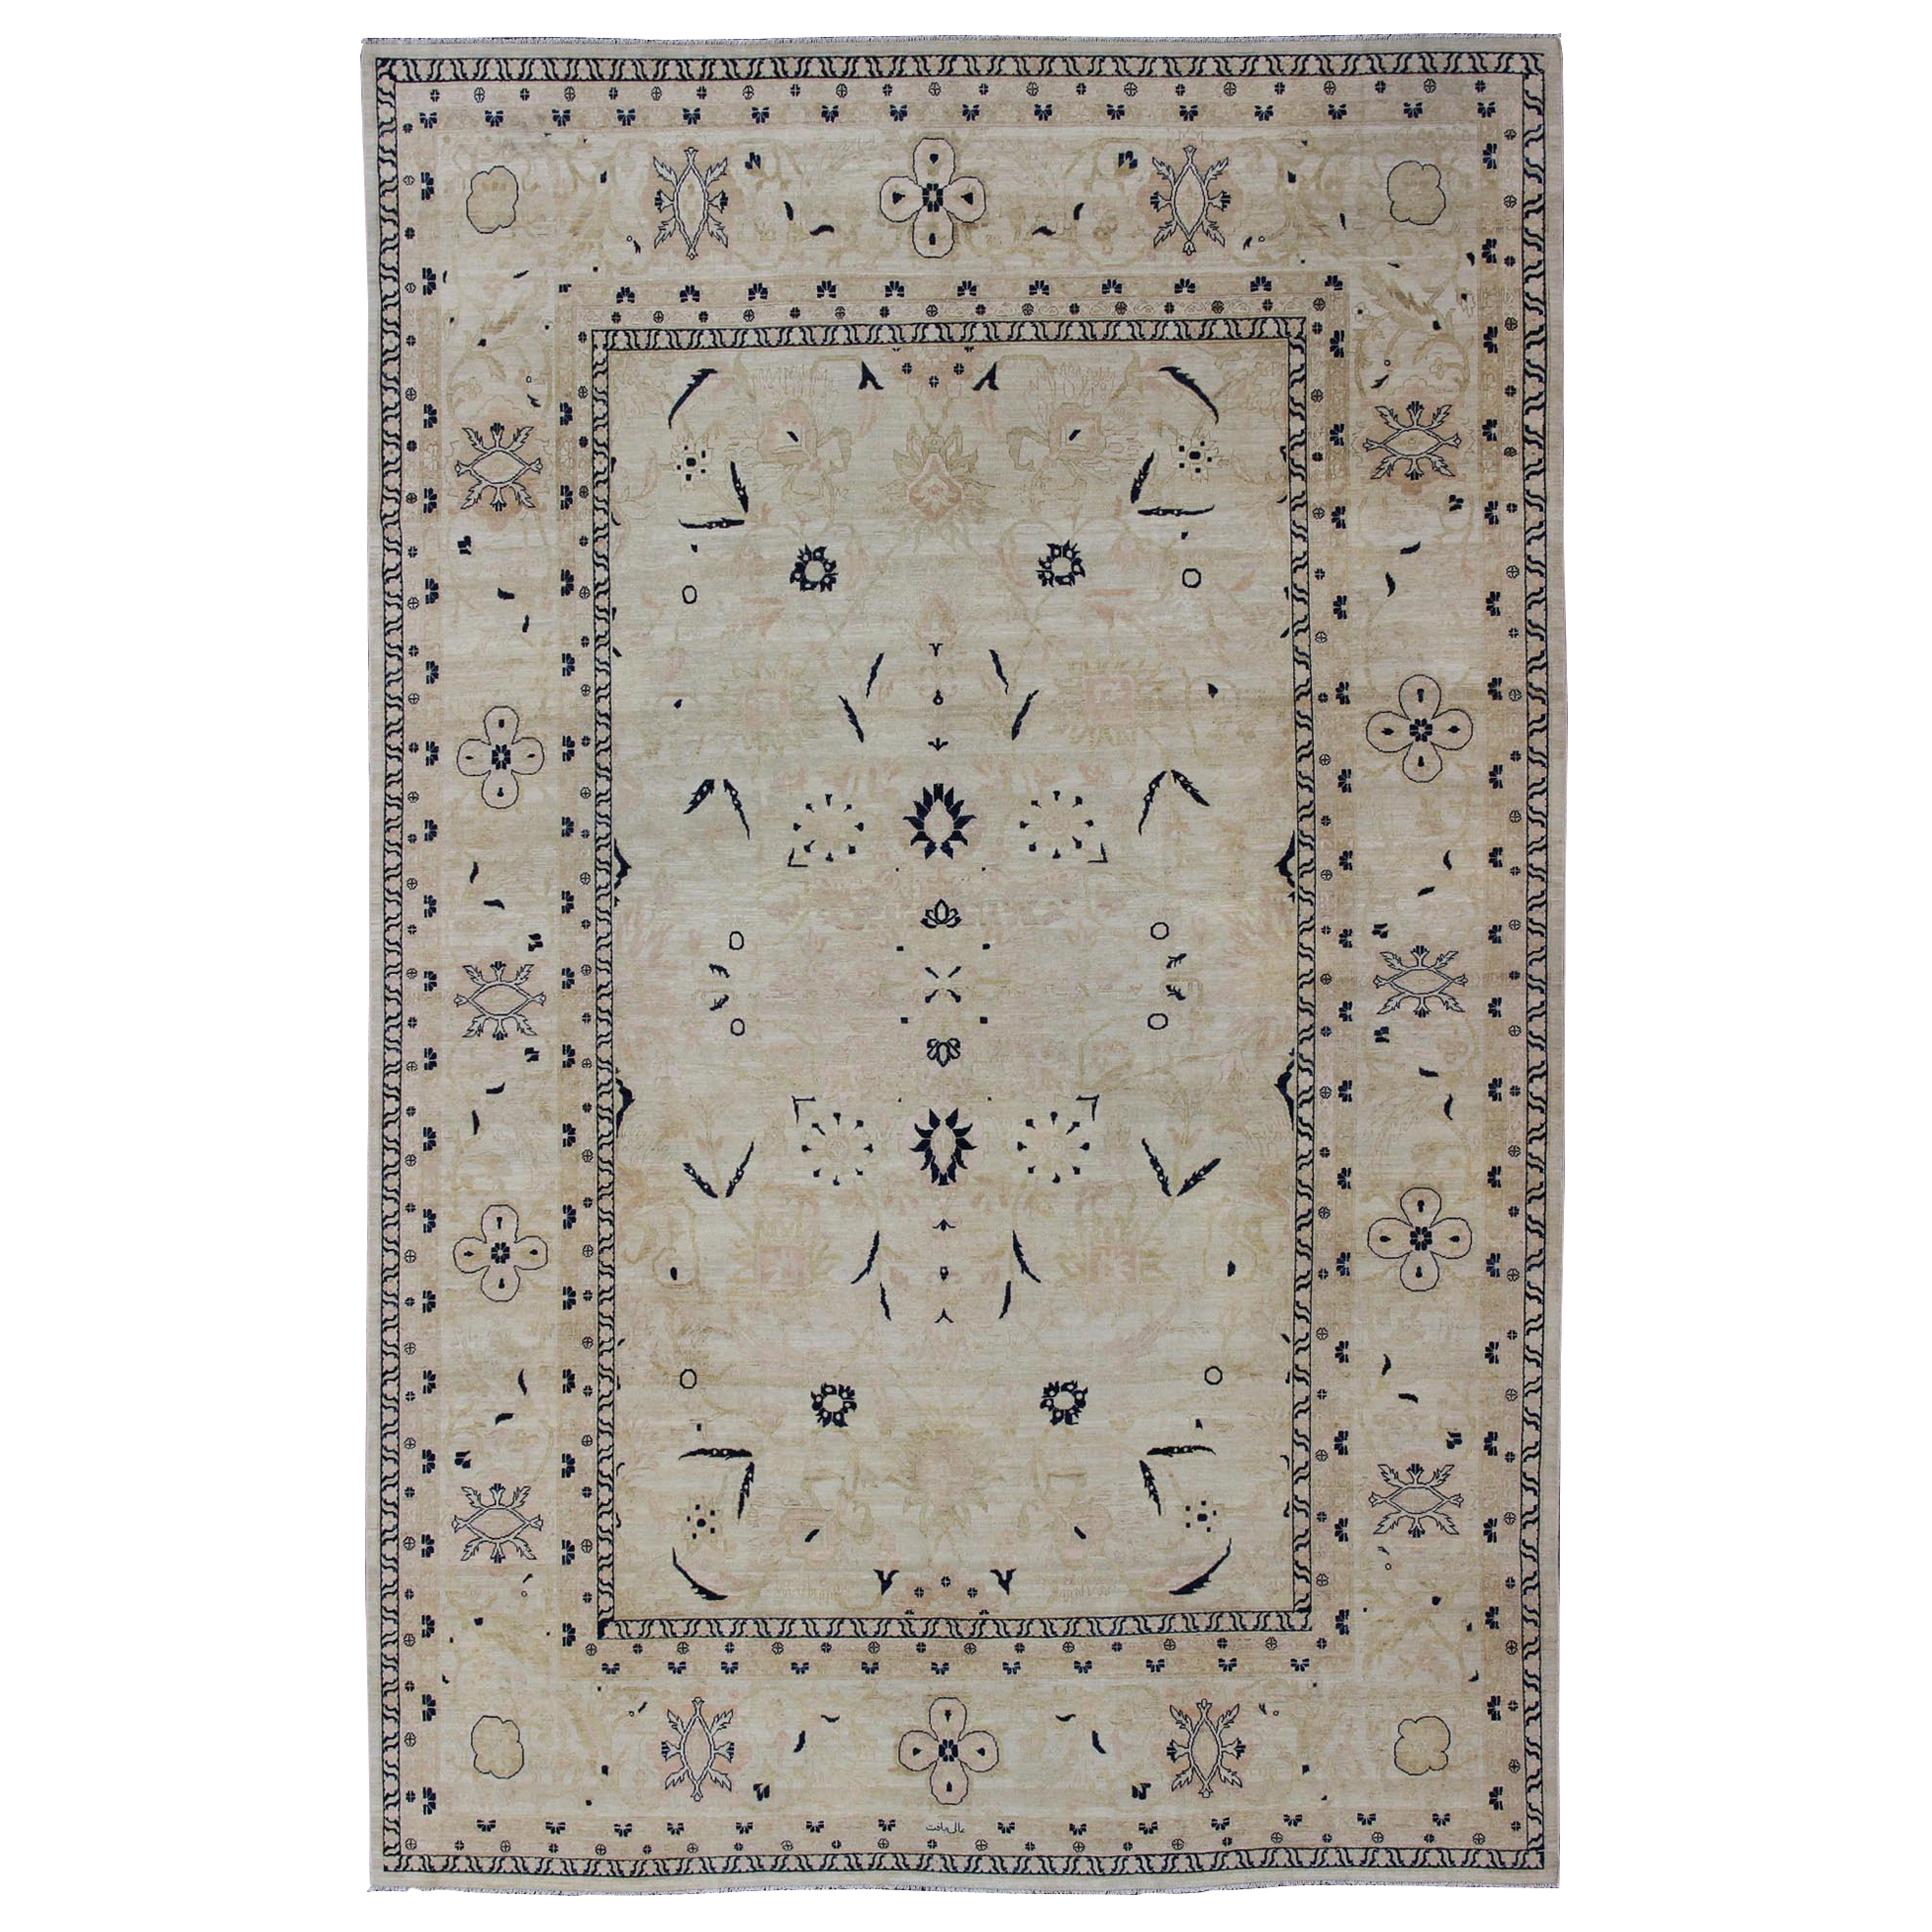 Afghan All-Over Tabriz Rug in Blue, Cream and light Butter Color For Sale